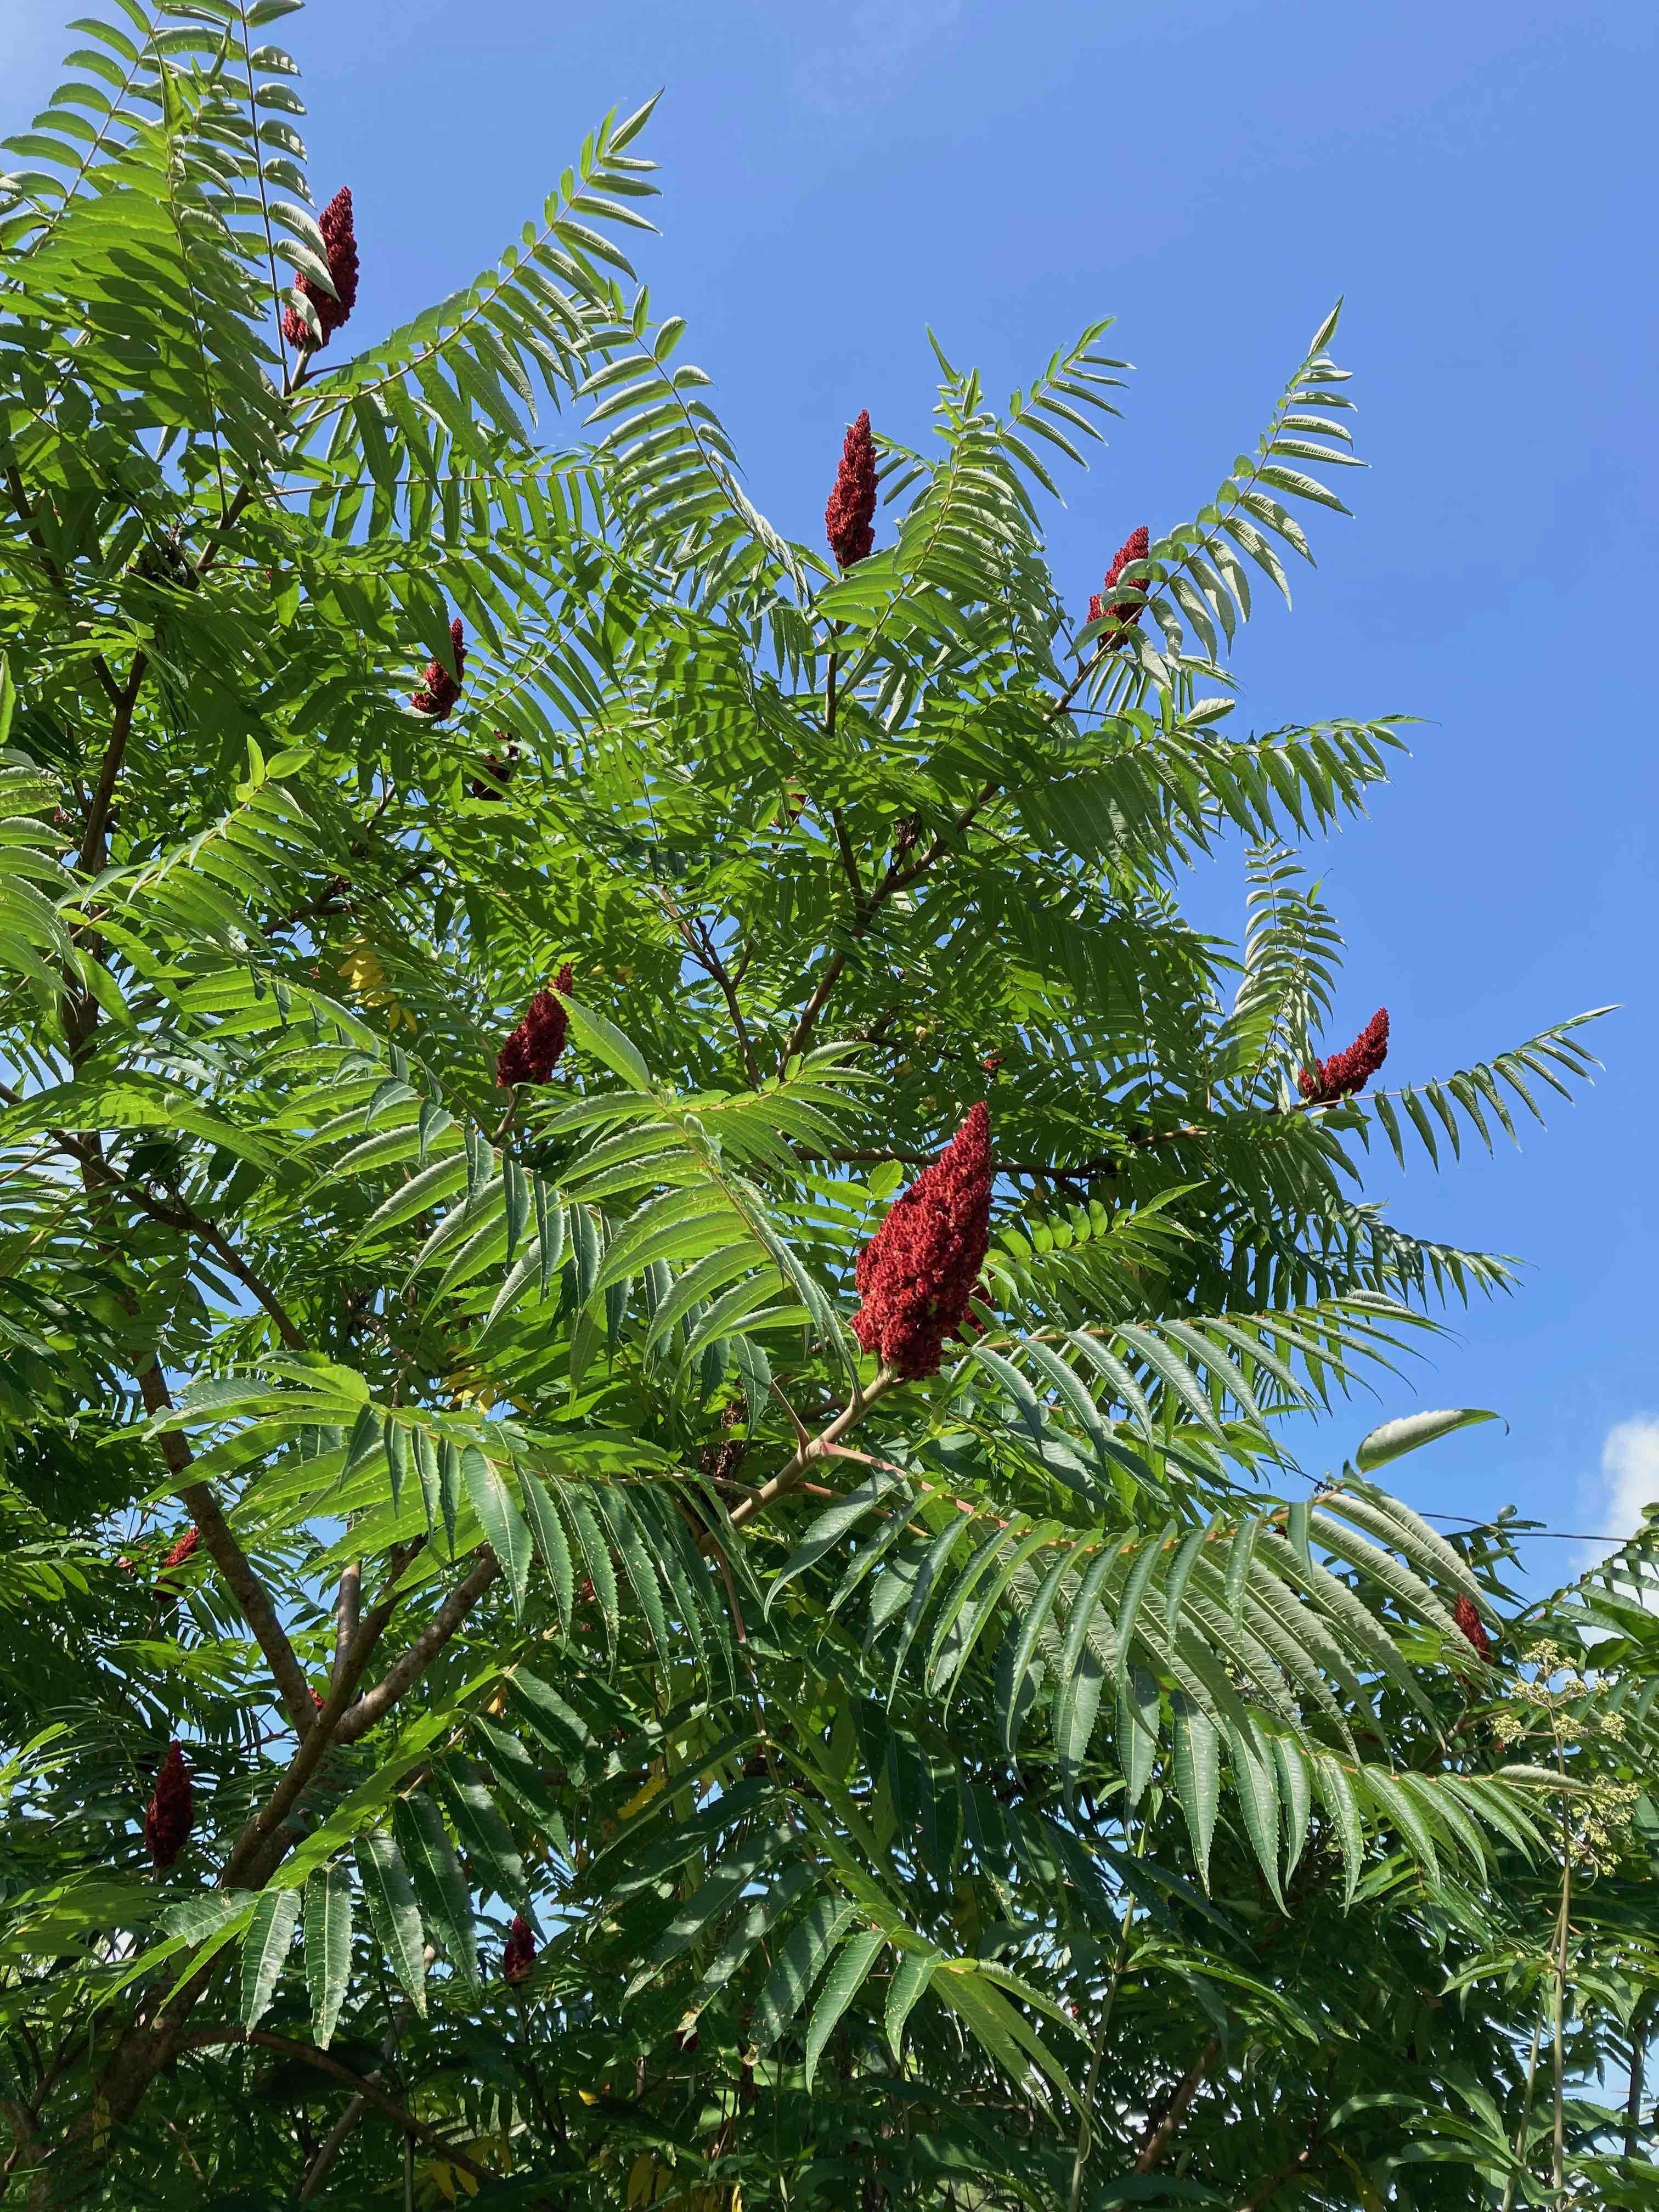 The Scientific Name is Rhus typhina. You will likely hear them called Staghorn Sumac. This picture shows the Large, pinnately compound leaves. Attractive fruit consisting of a cluster of red drupes. of Rhus typhina